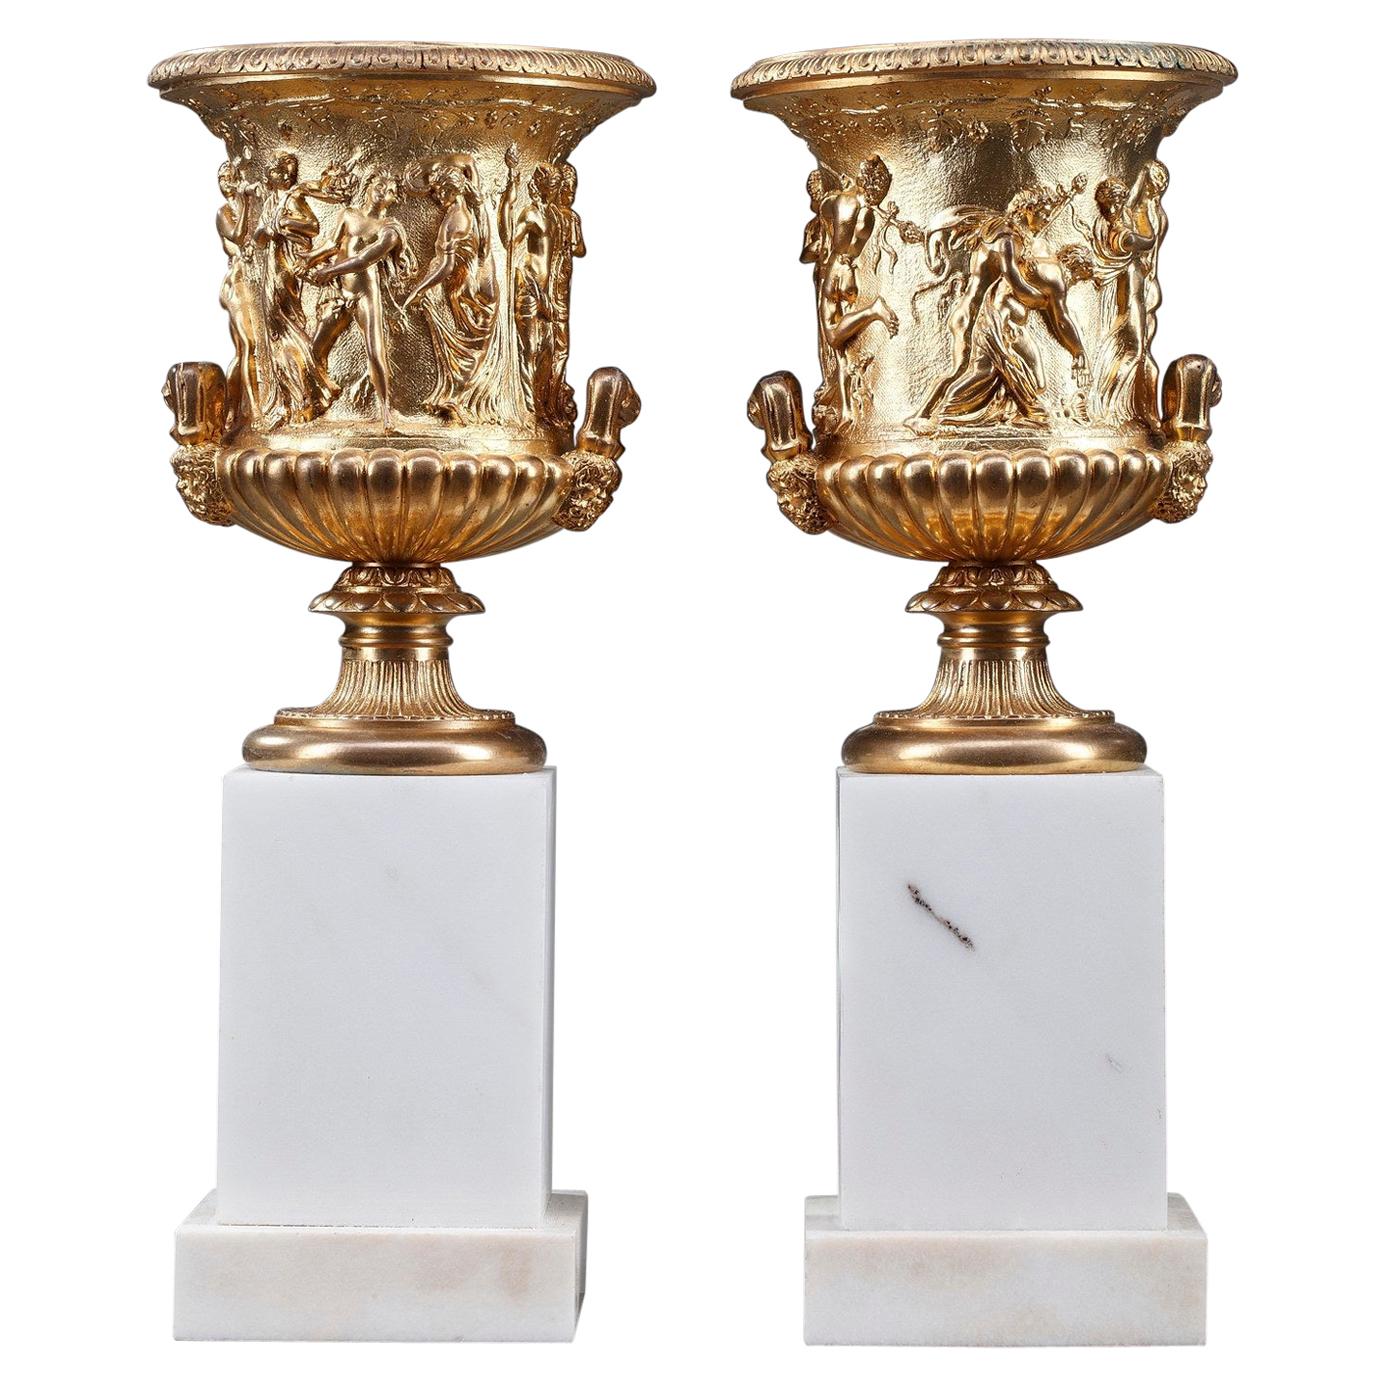 Pair of Gilded Bronze Medici Vases with Antique Decoration